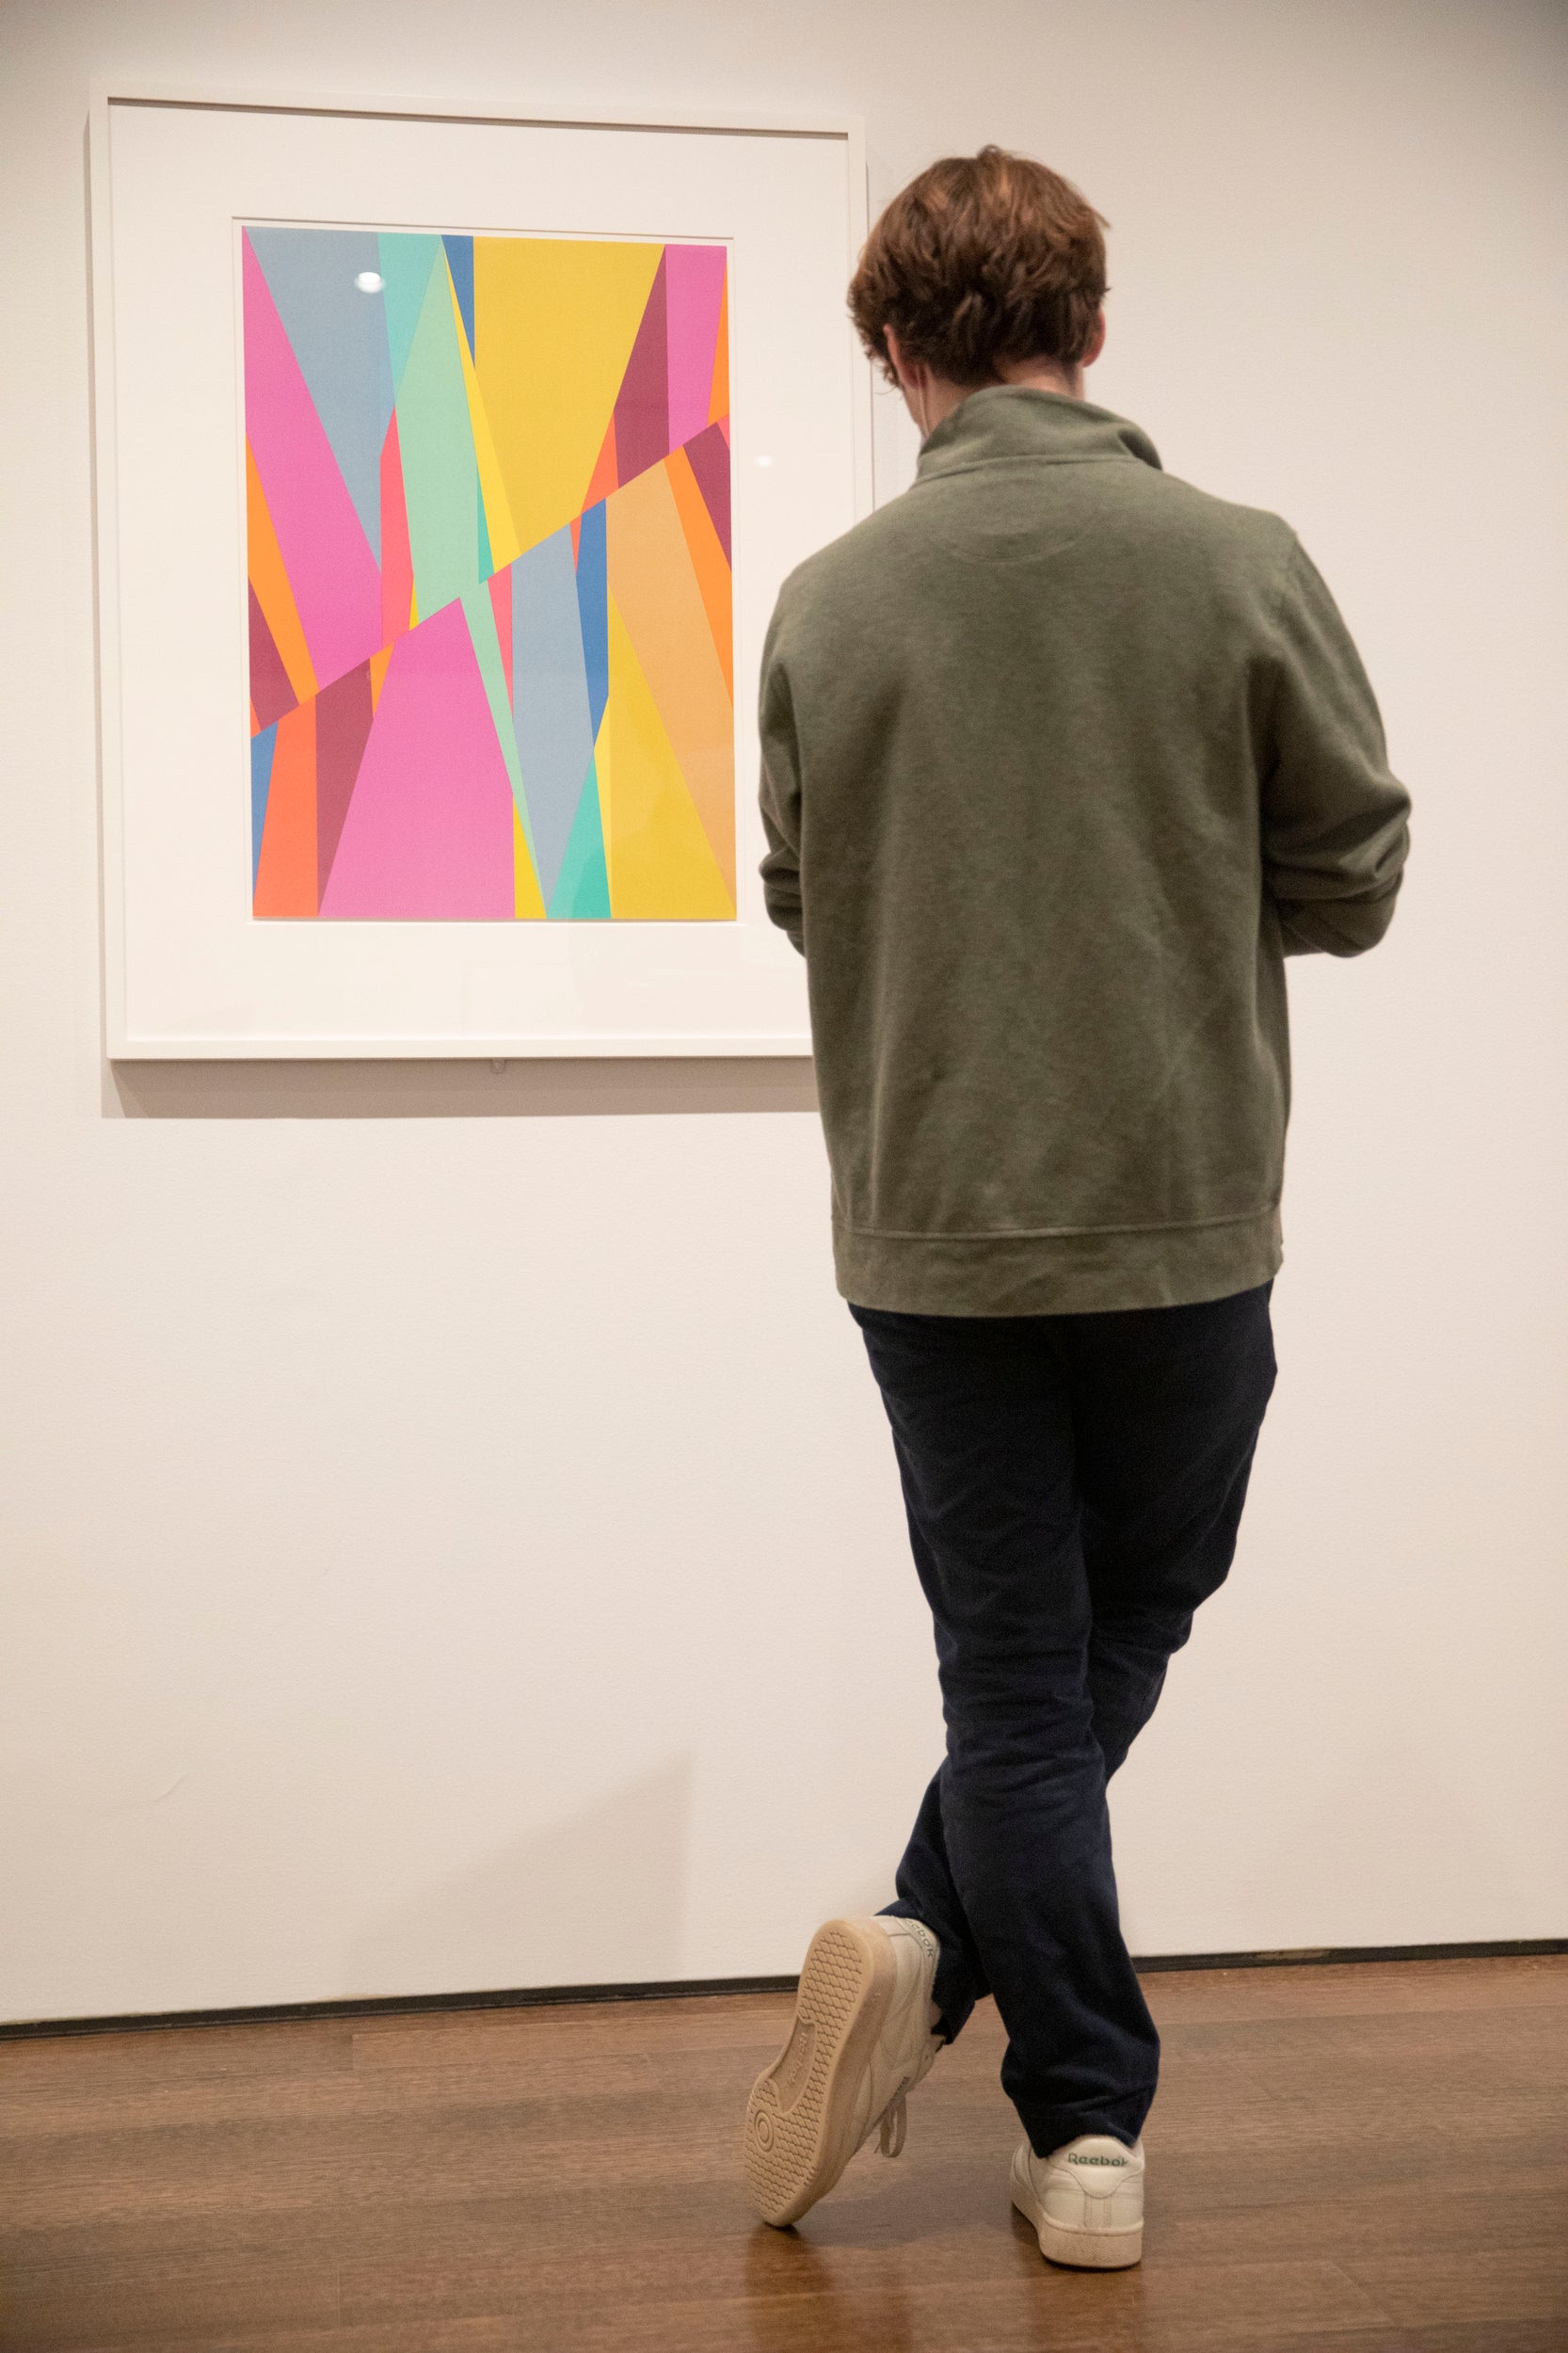 A student in a museum looks at a piece of artwork on the wall